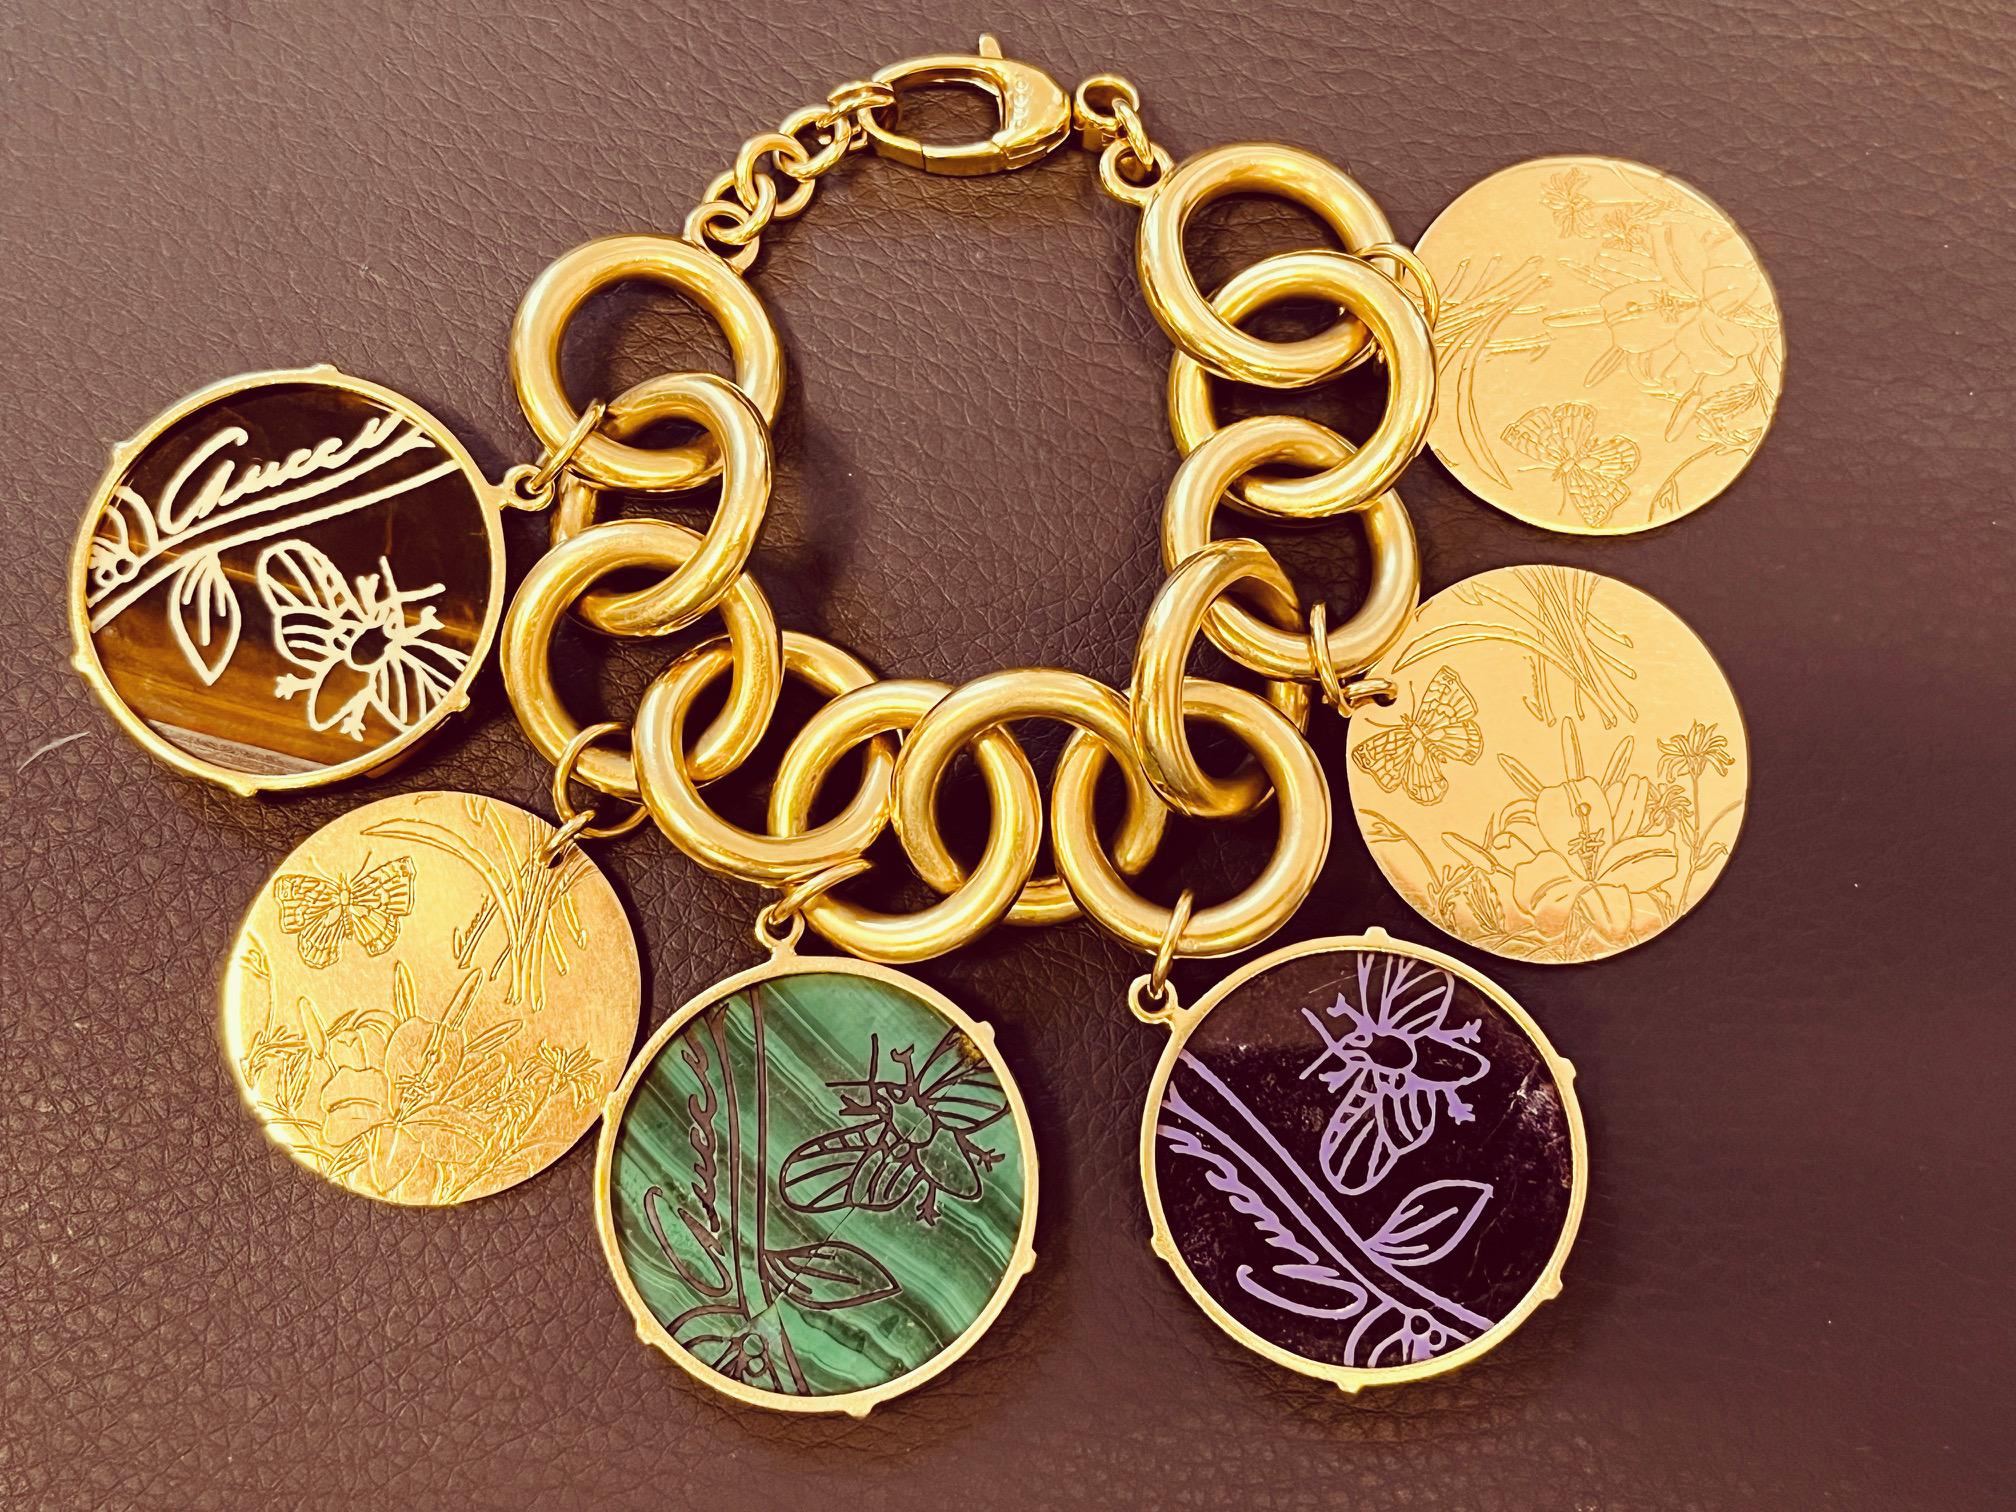 GUCCI - A Gucci Flora St. Tropez 18ct yellow gold bracelet with Malachite, Sugilite, Tiger's Eye, and gold etched charms. The bracelet is designed with circular links, and has a total of six discs hanging from the links with etchings of butterflies